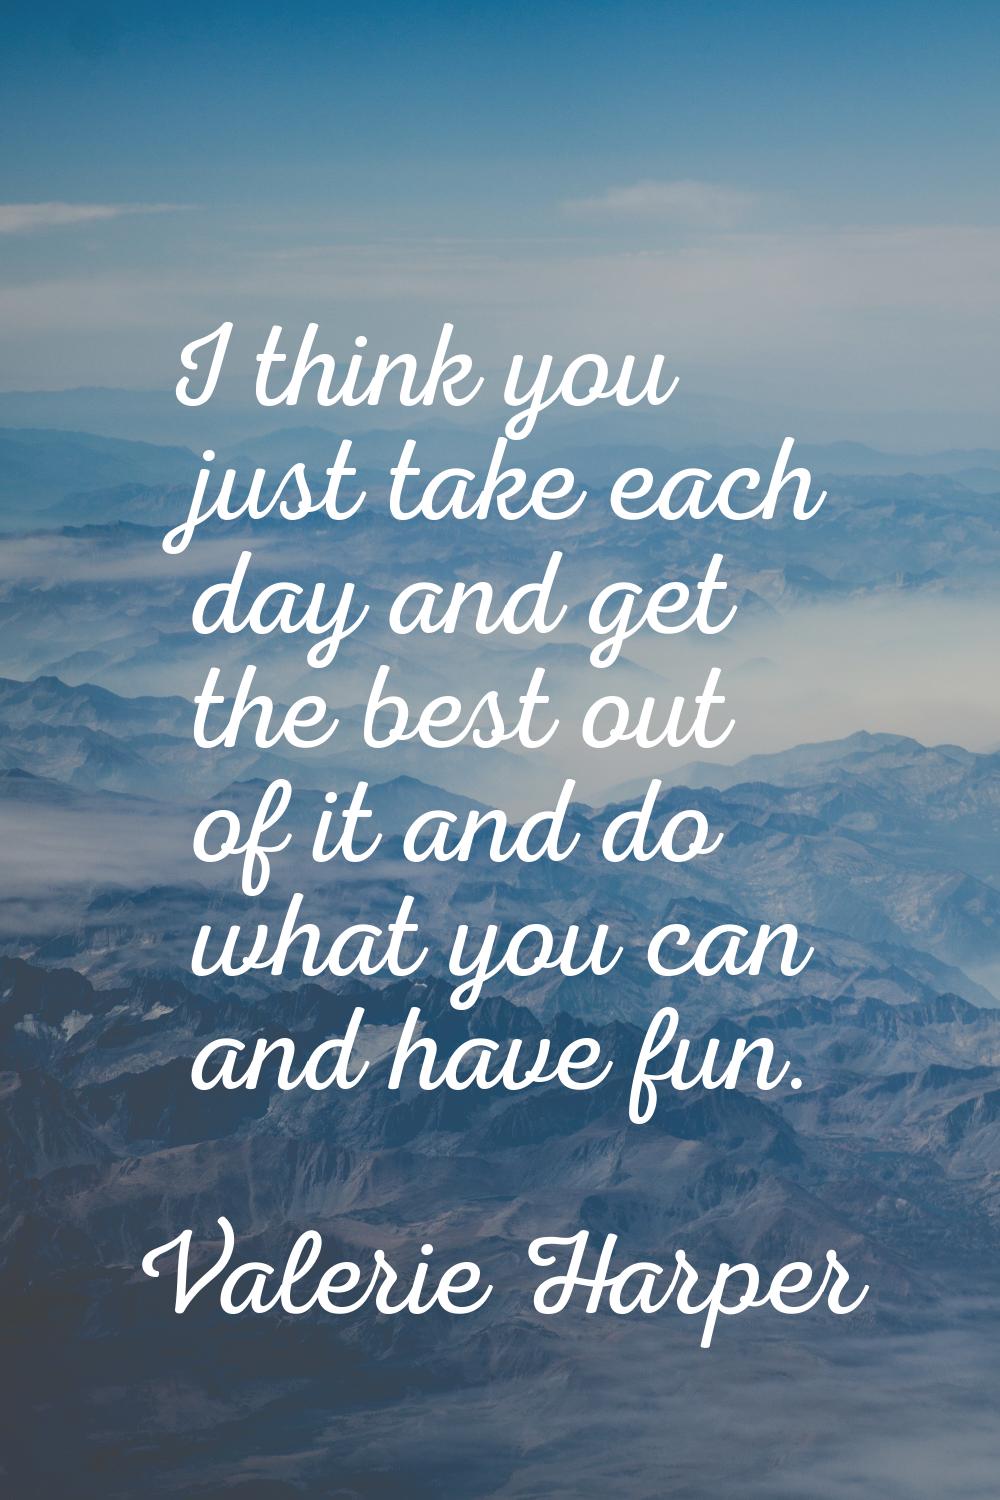 I think you just take each day and get the best out of it and do what you can and have fun.